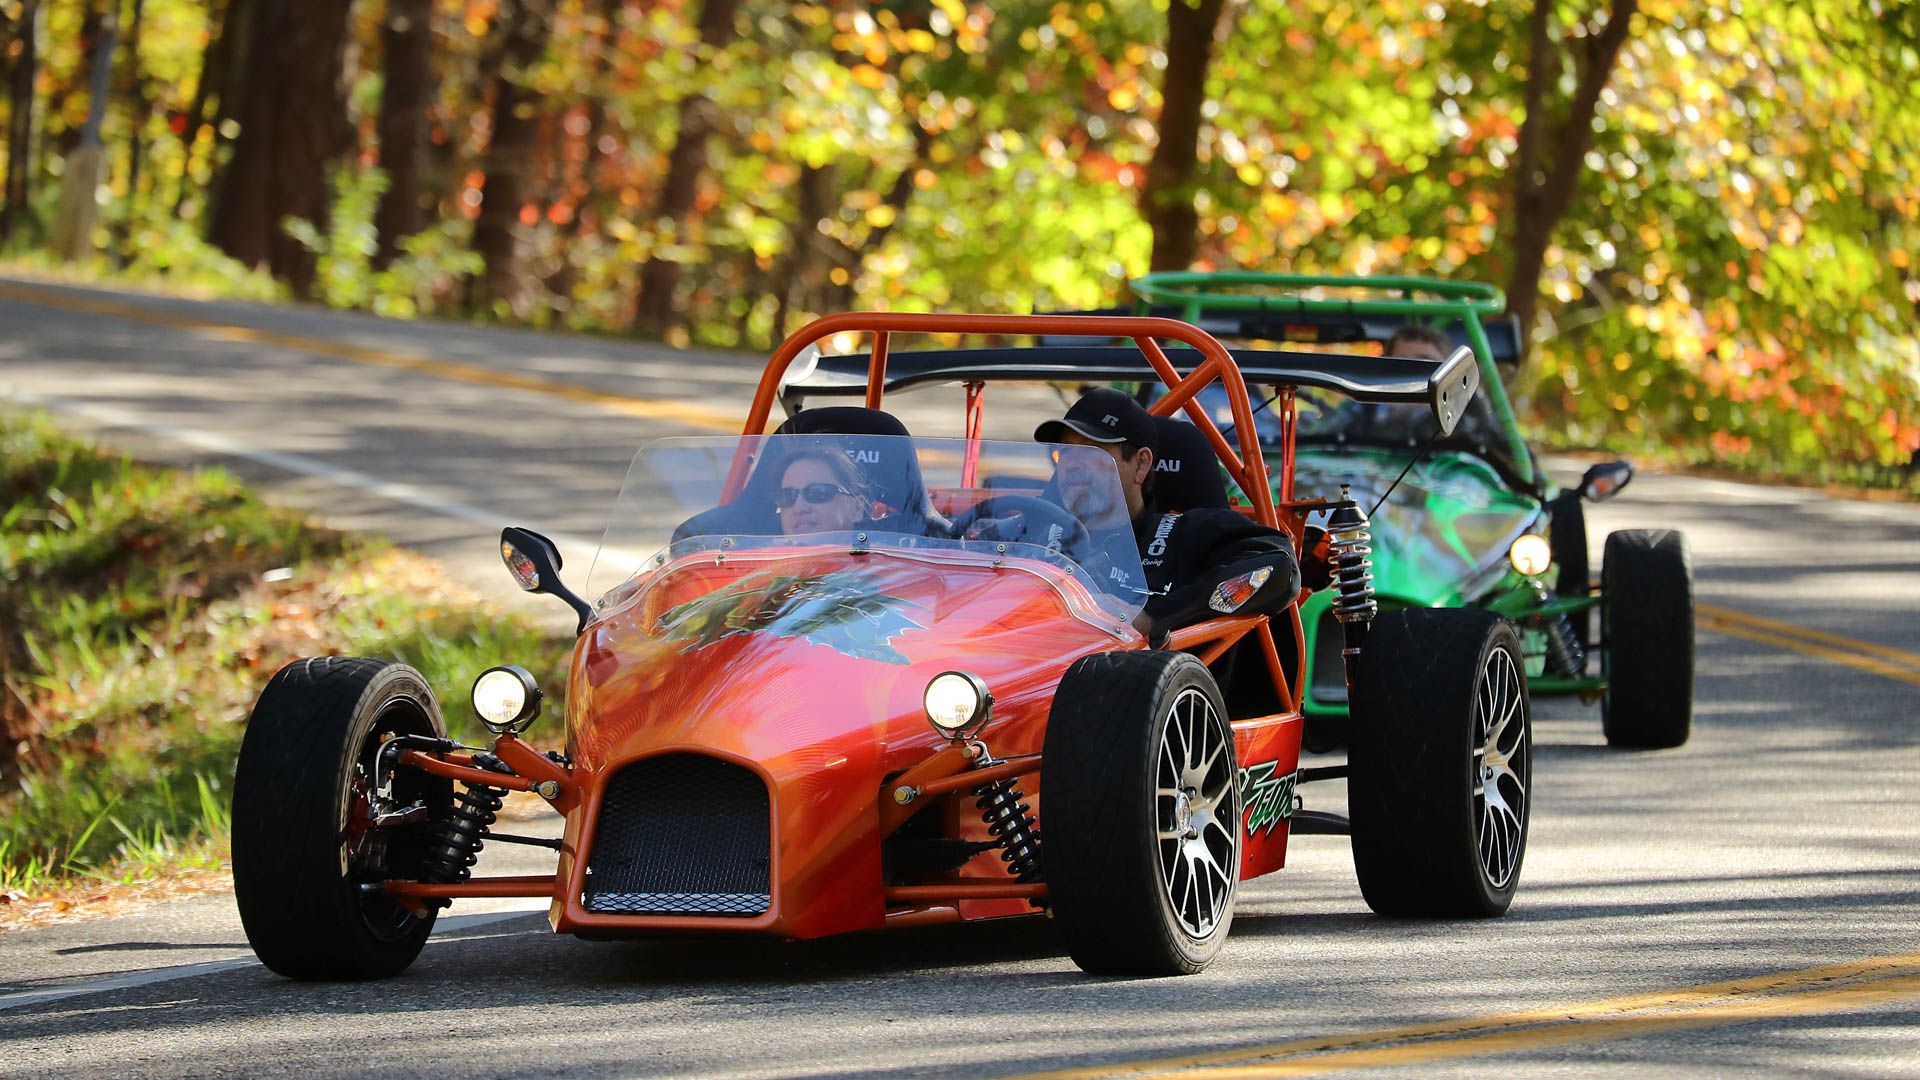 10 Kit Cars To Buy If You Prefer To Build Your Own Cars